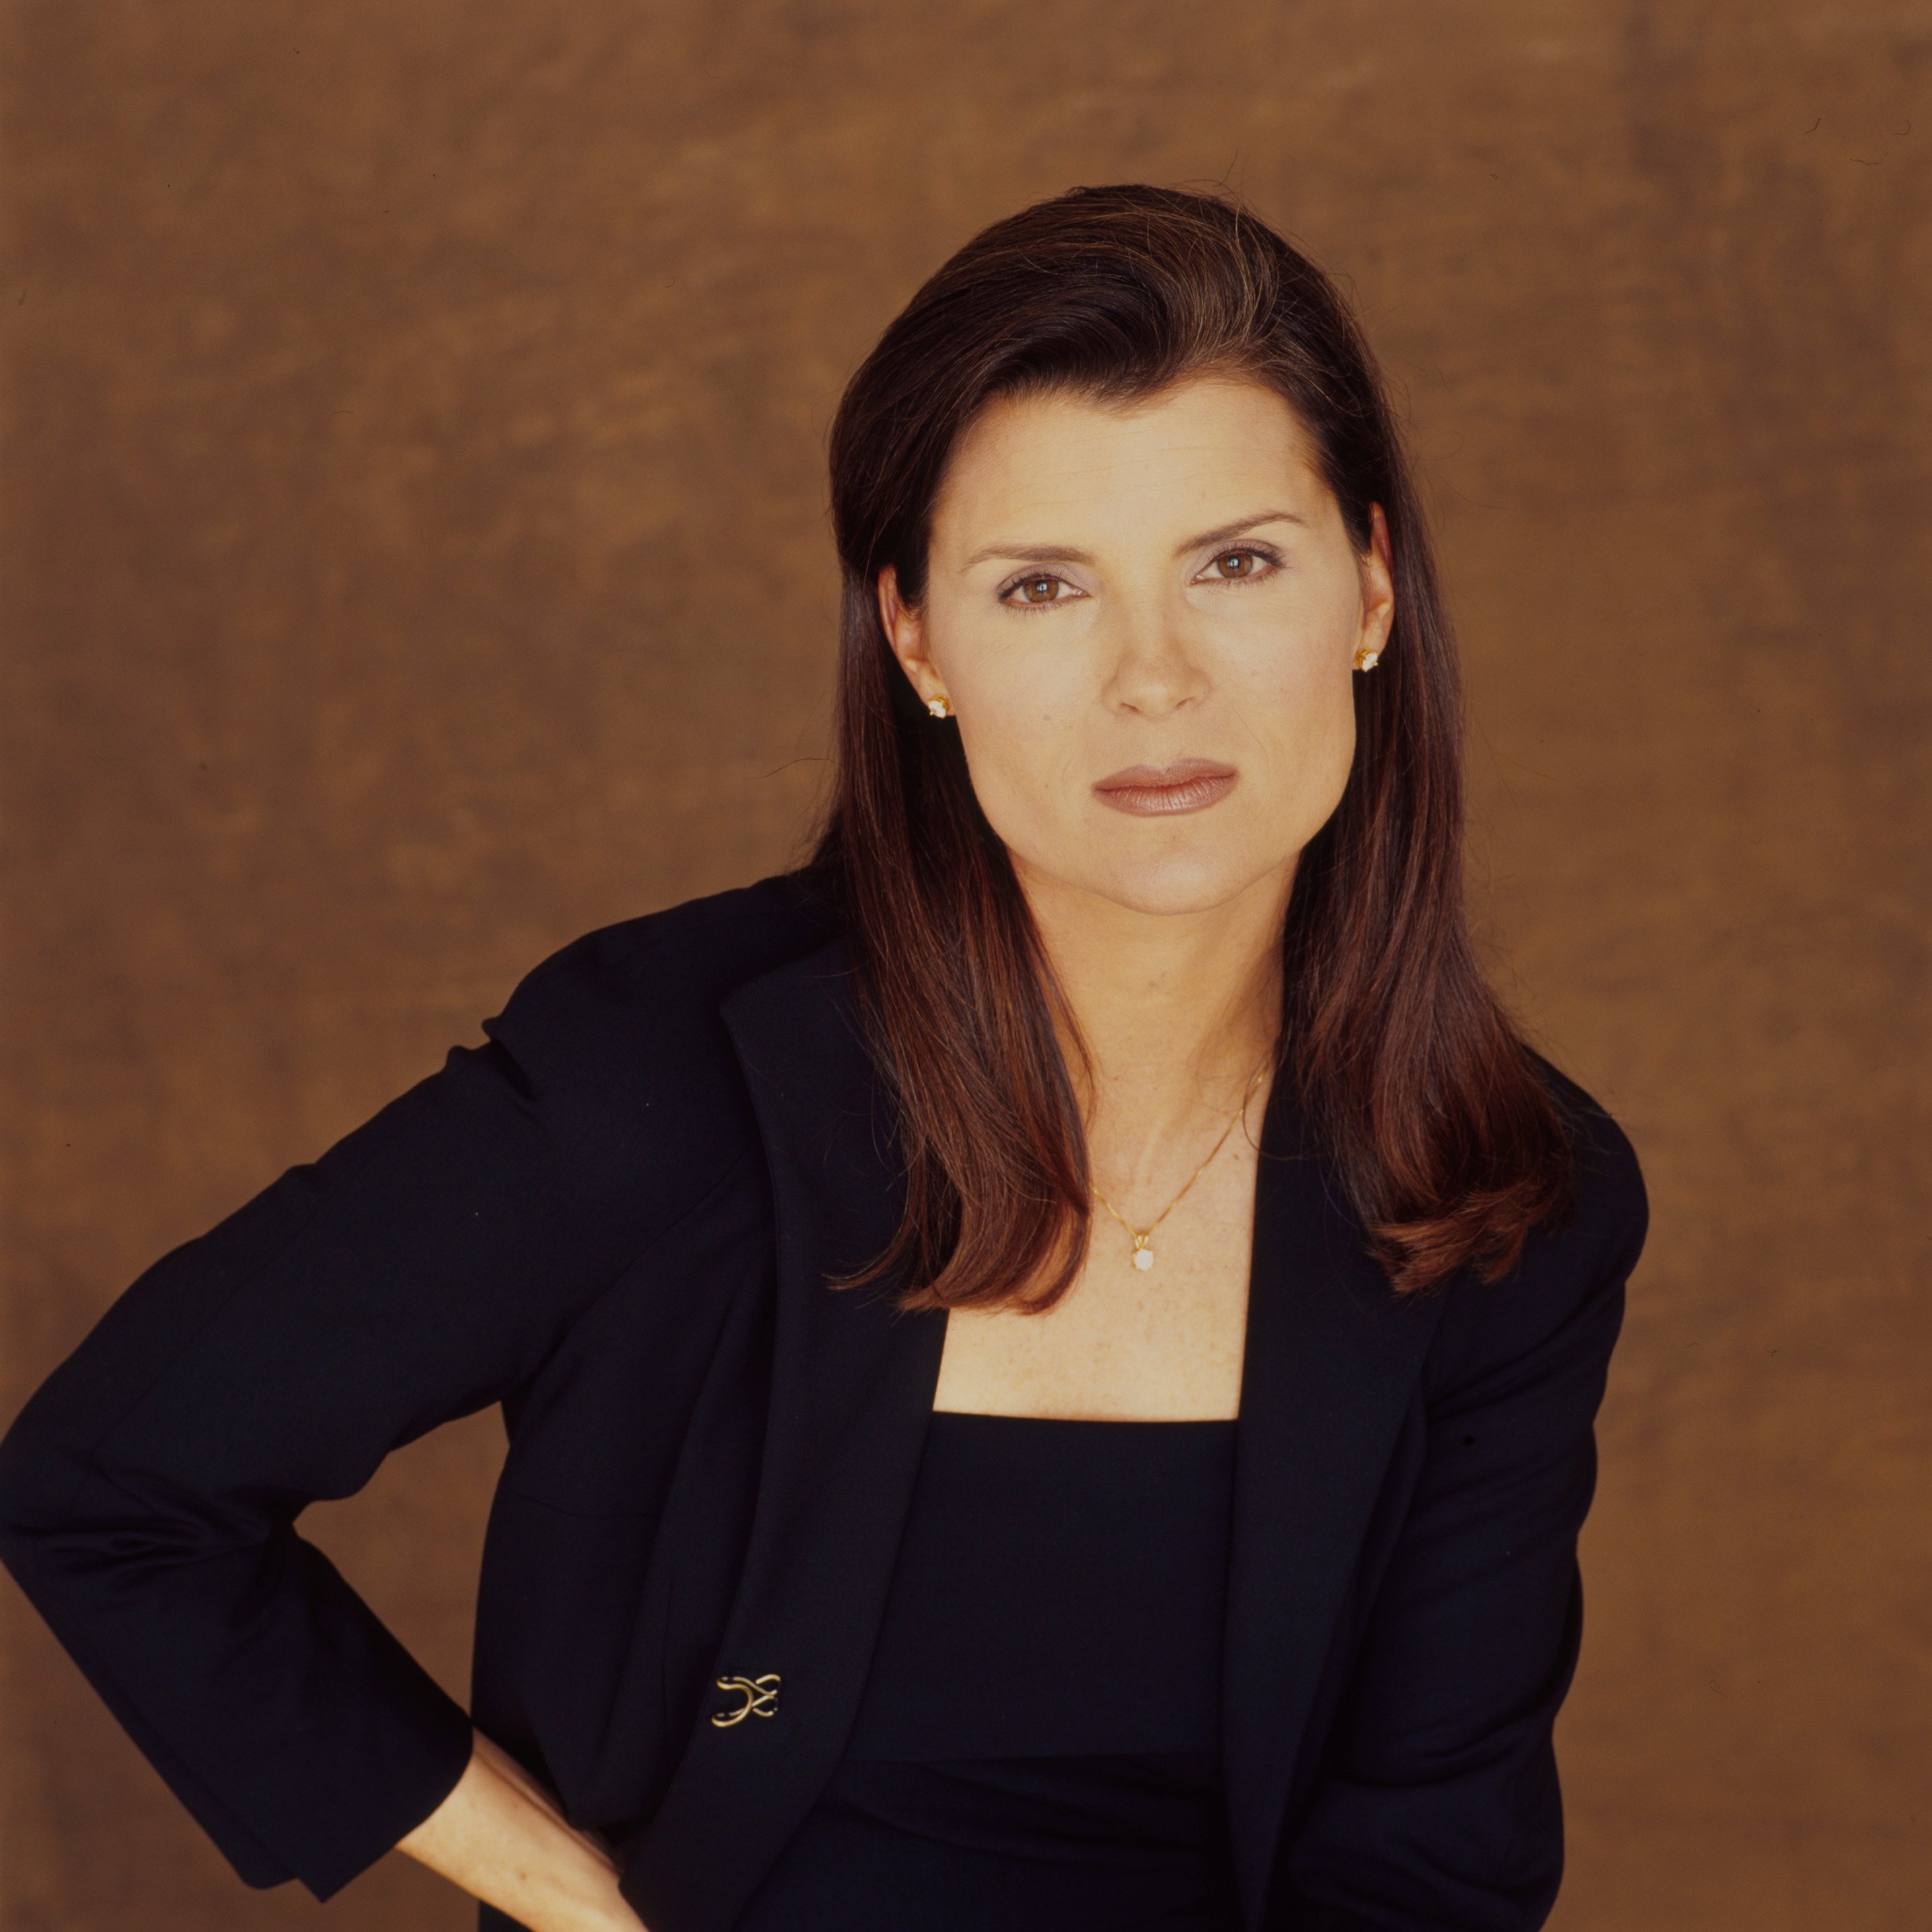 'The Bold and the Beautiful' actor Kimberlin Brown wearing a blue suit and posing in front of a brown backdrop.